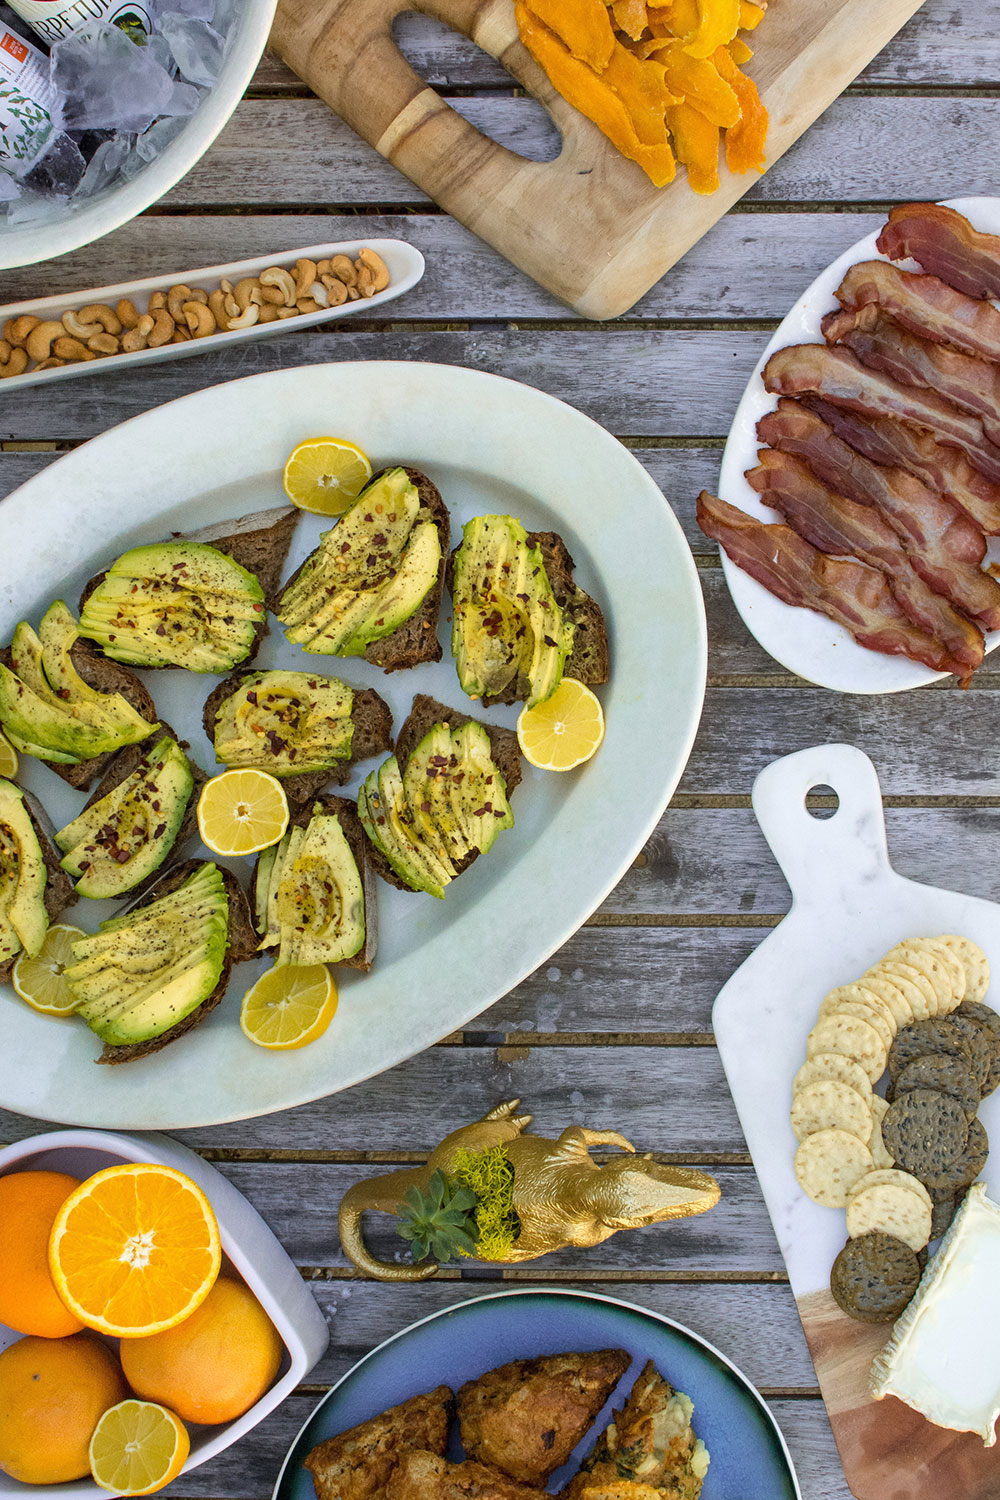 Avocados, Grilled Peaches, Bacon and Beer